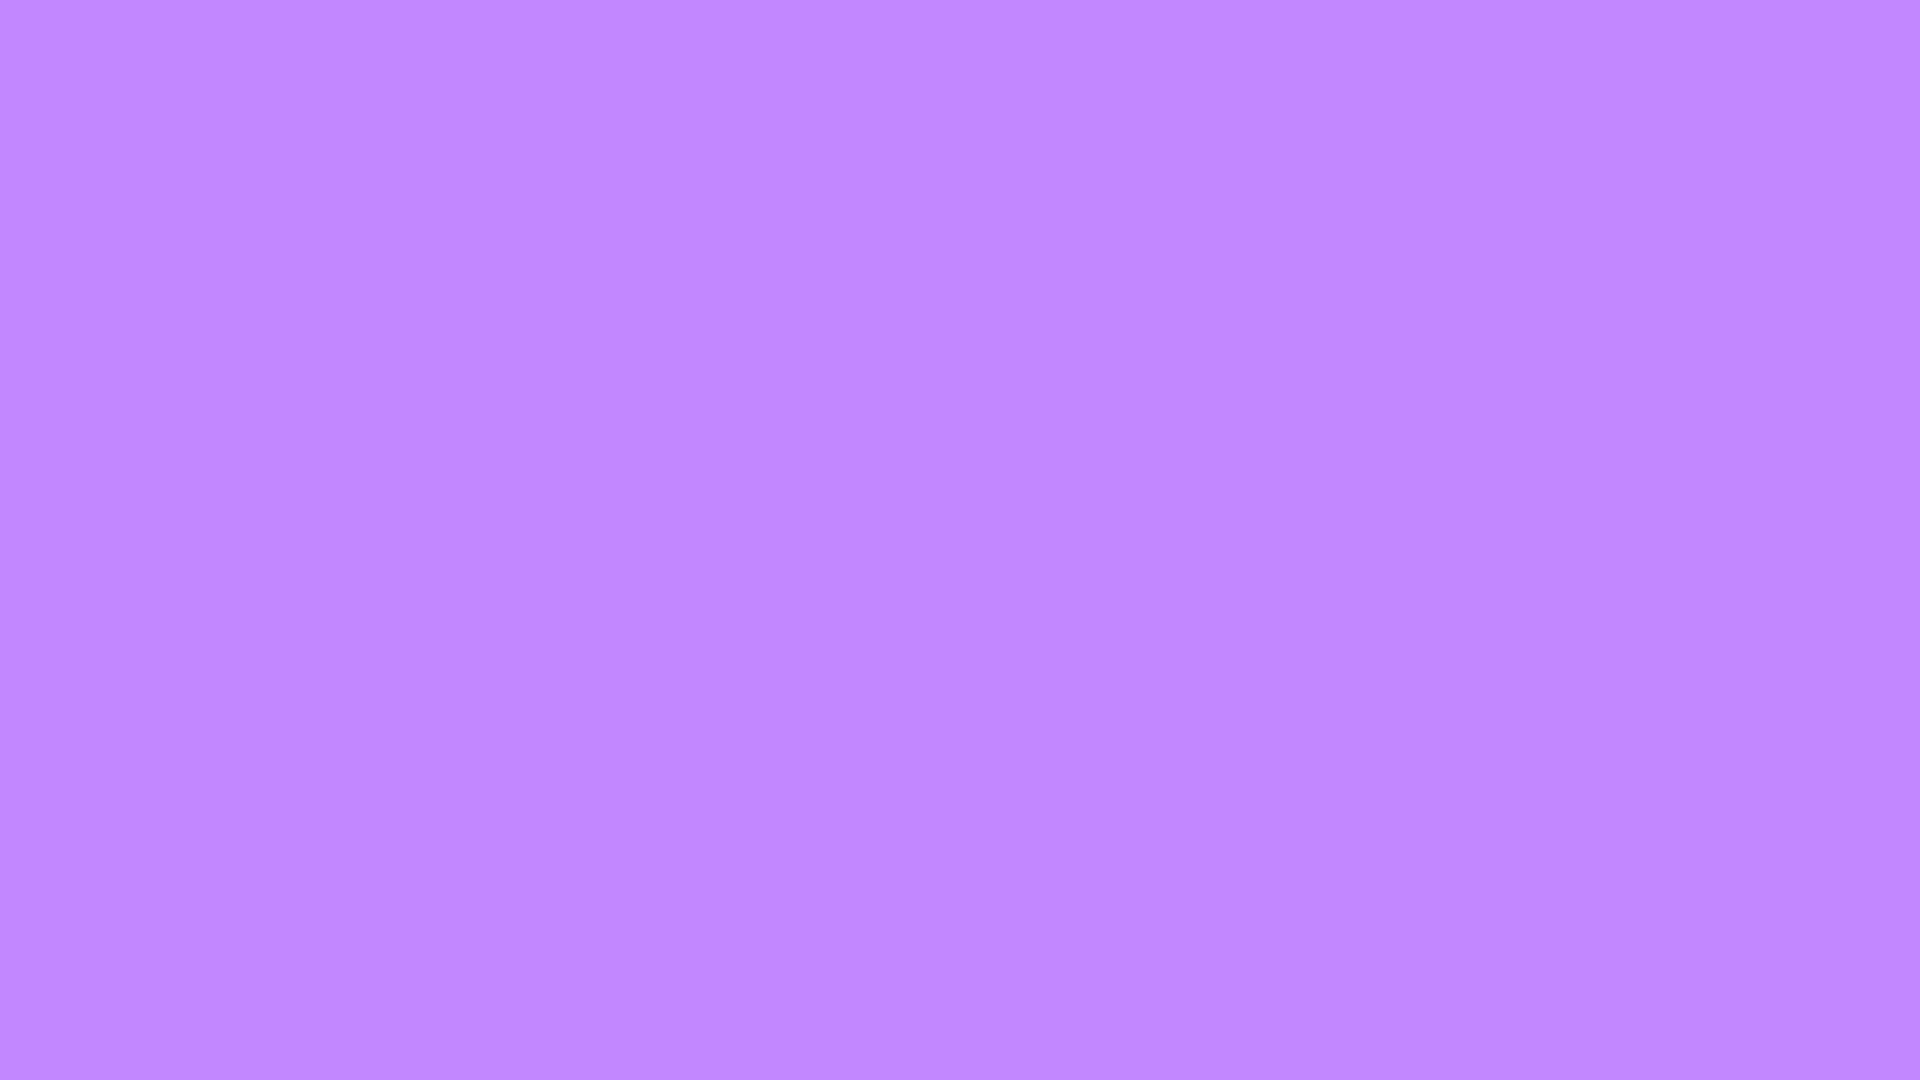 A Purple Background With A Small Square In The Middle